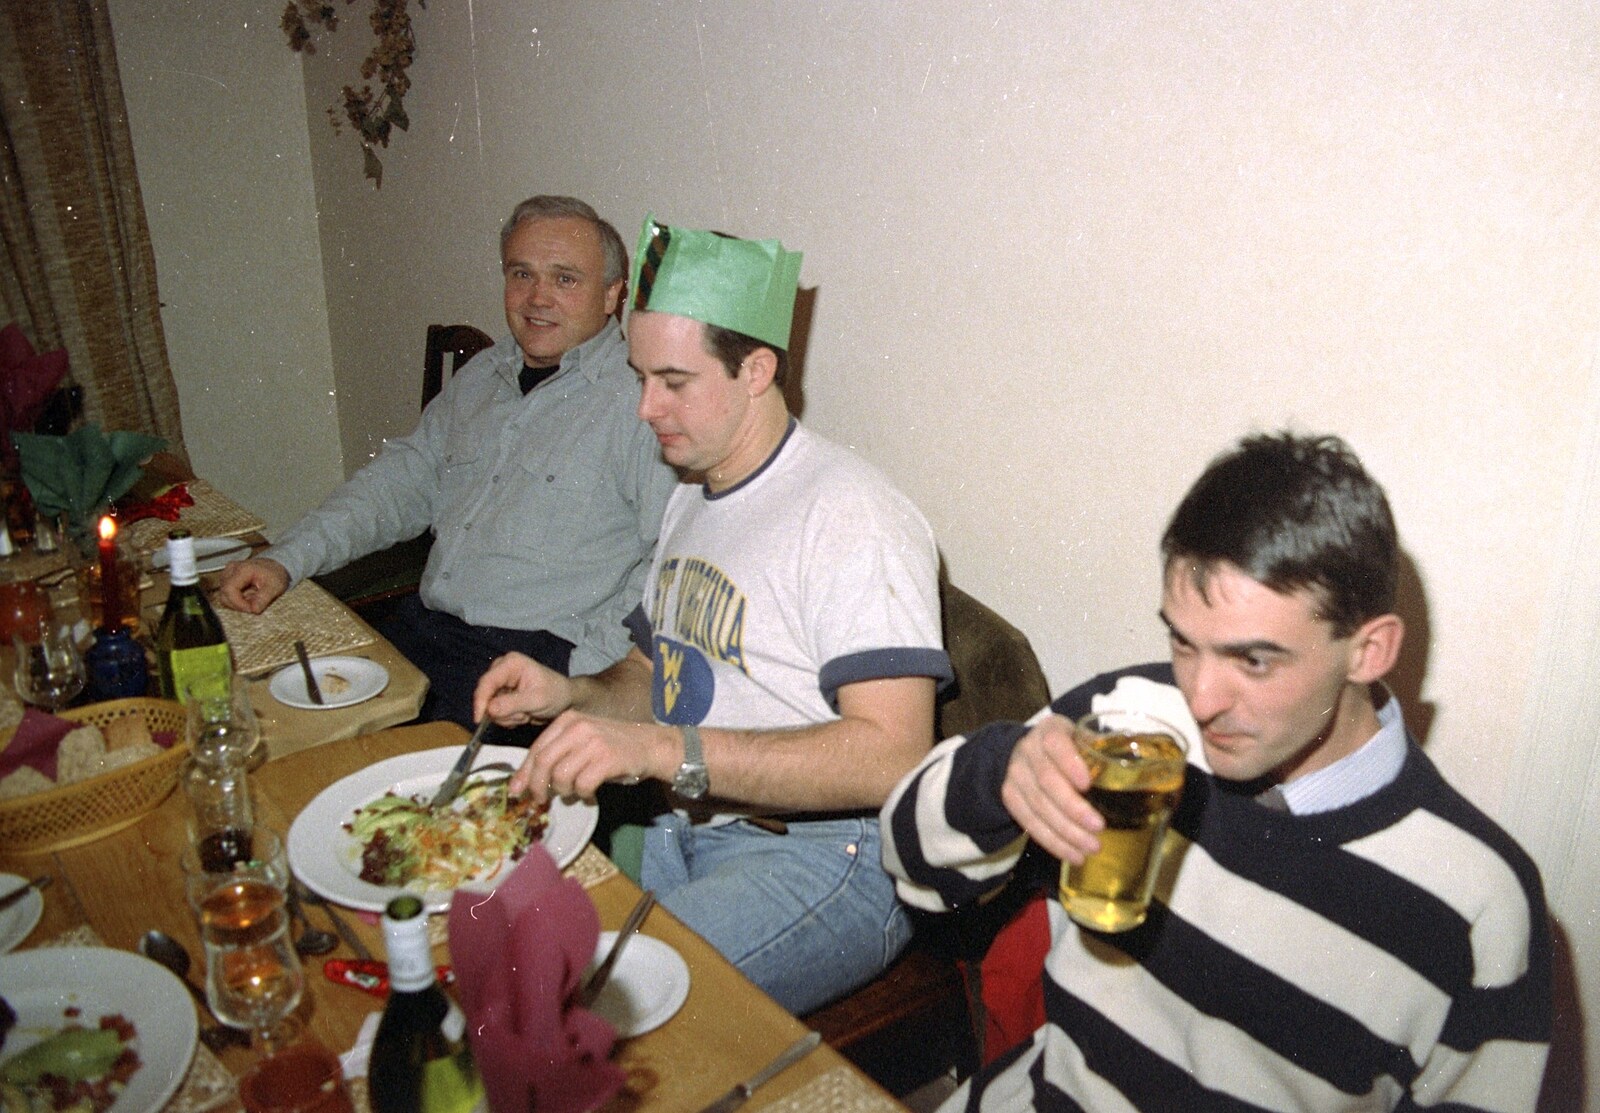 Rob Pereira has a cider from Hamish's Thirtieth Birthday, Hare and Hounds, Sway, Hampshire - 19th December 1996